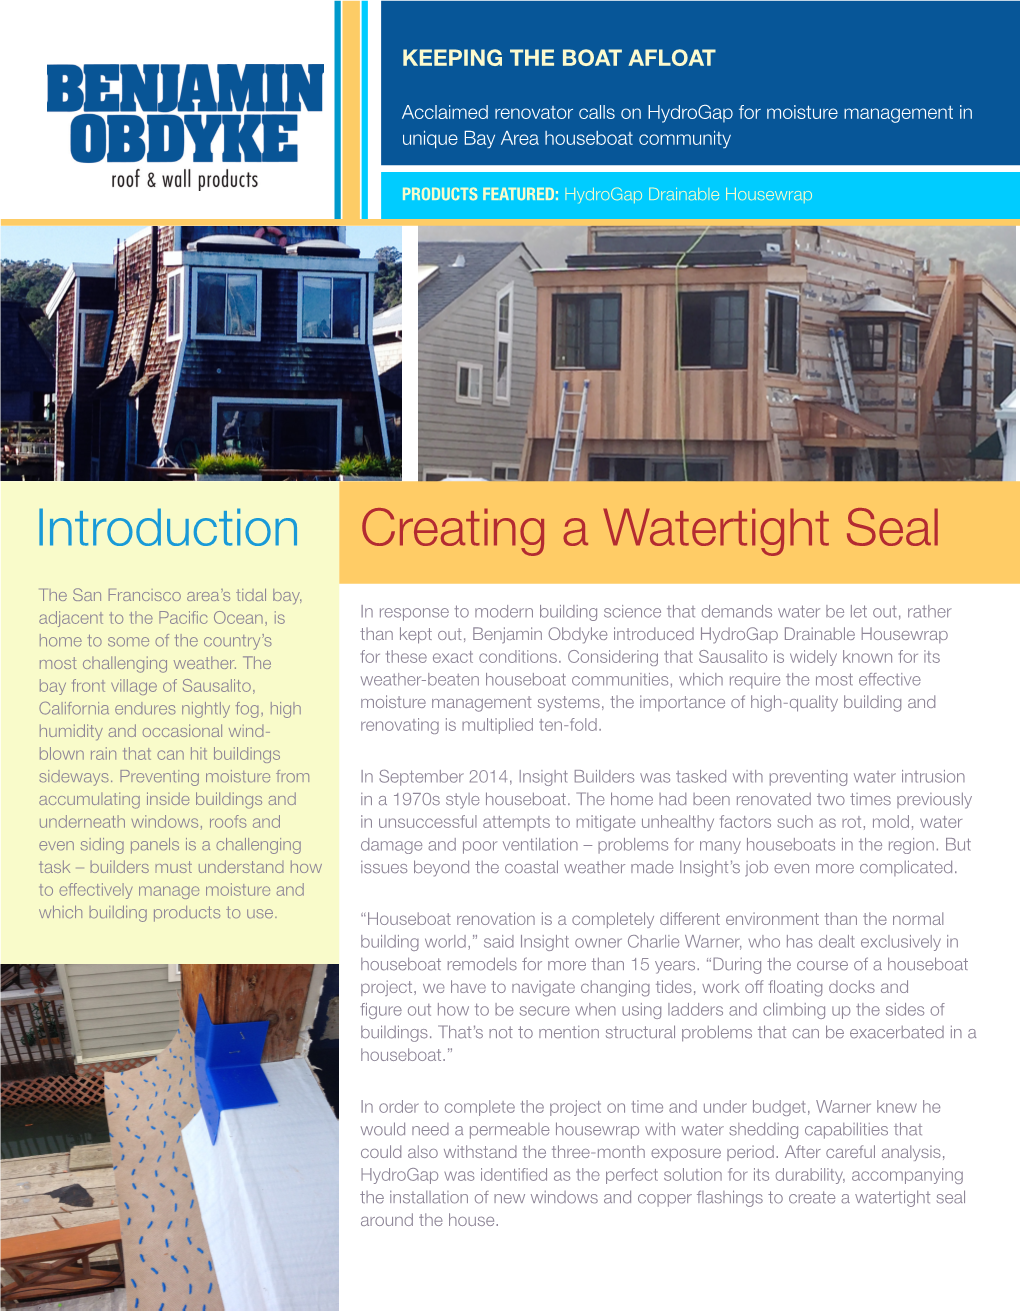 Sausalito Houseboat Case Study with Hydrogap